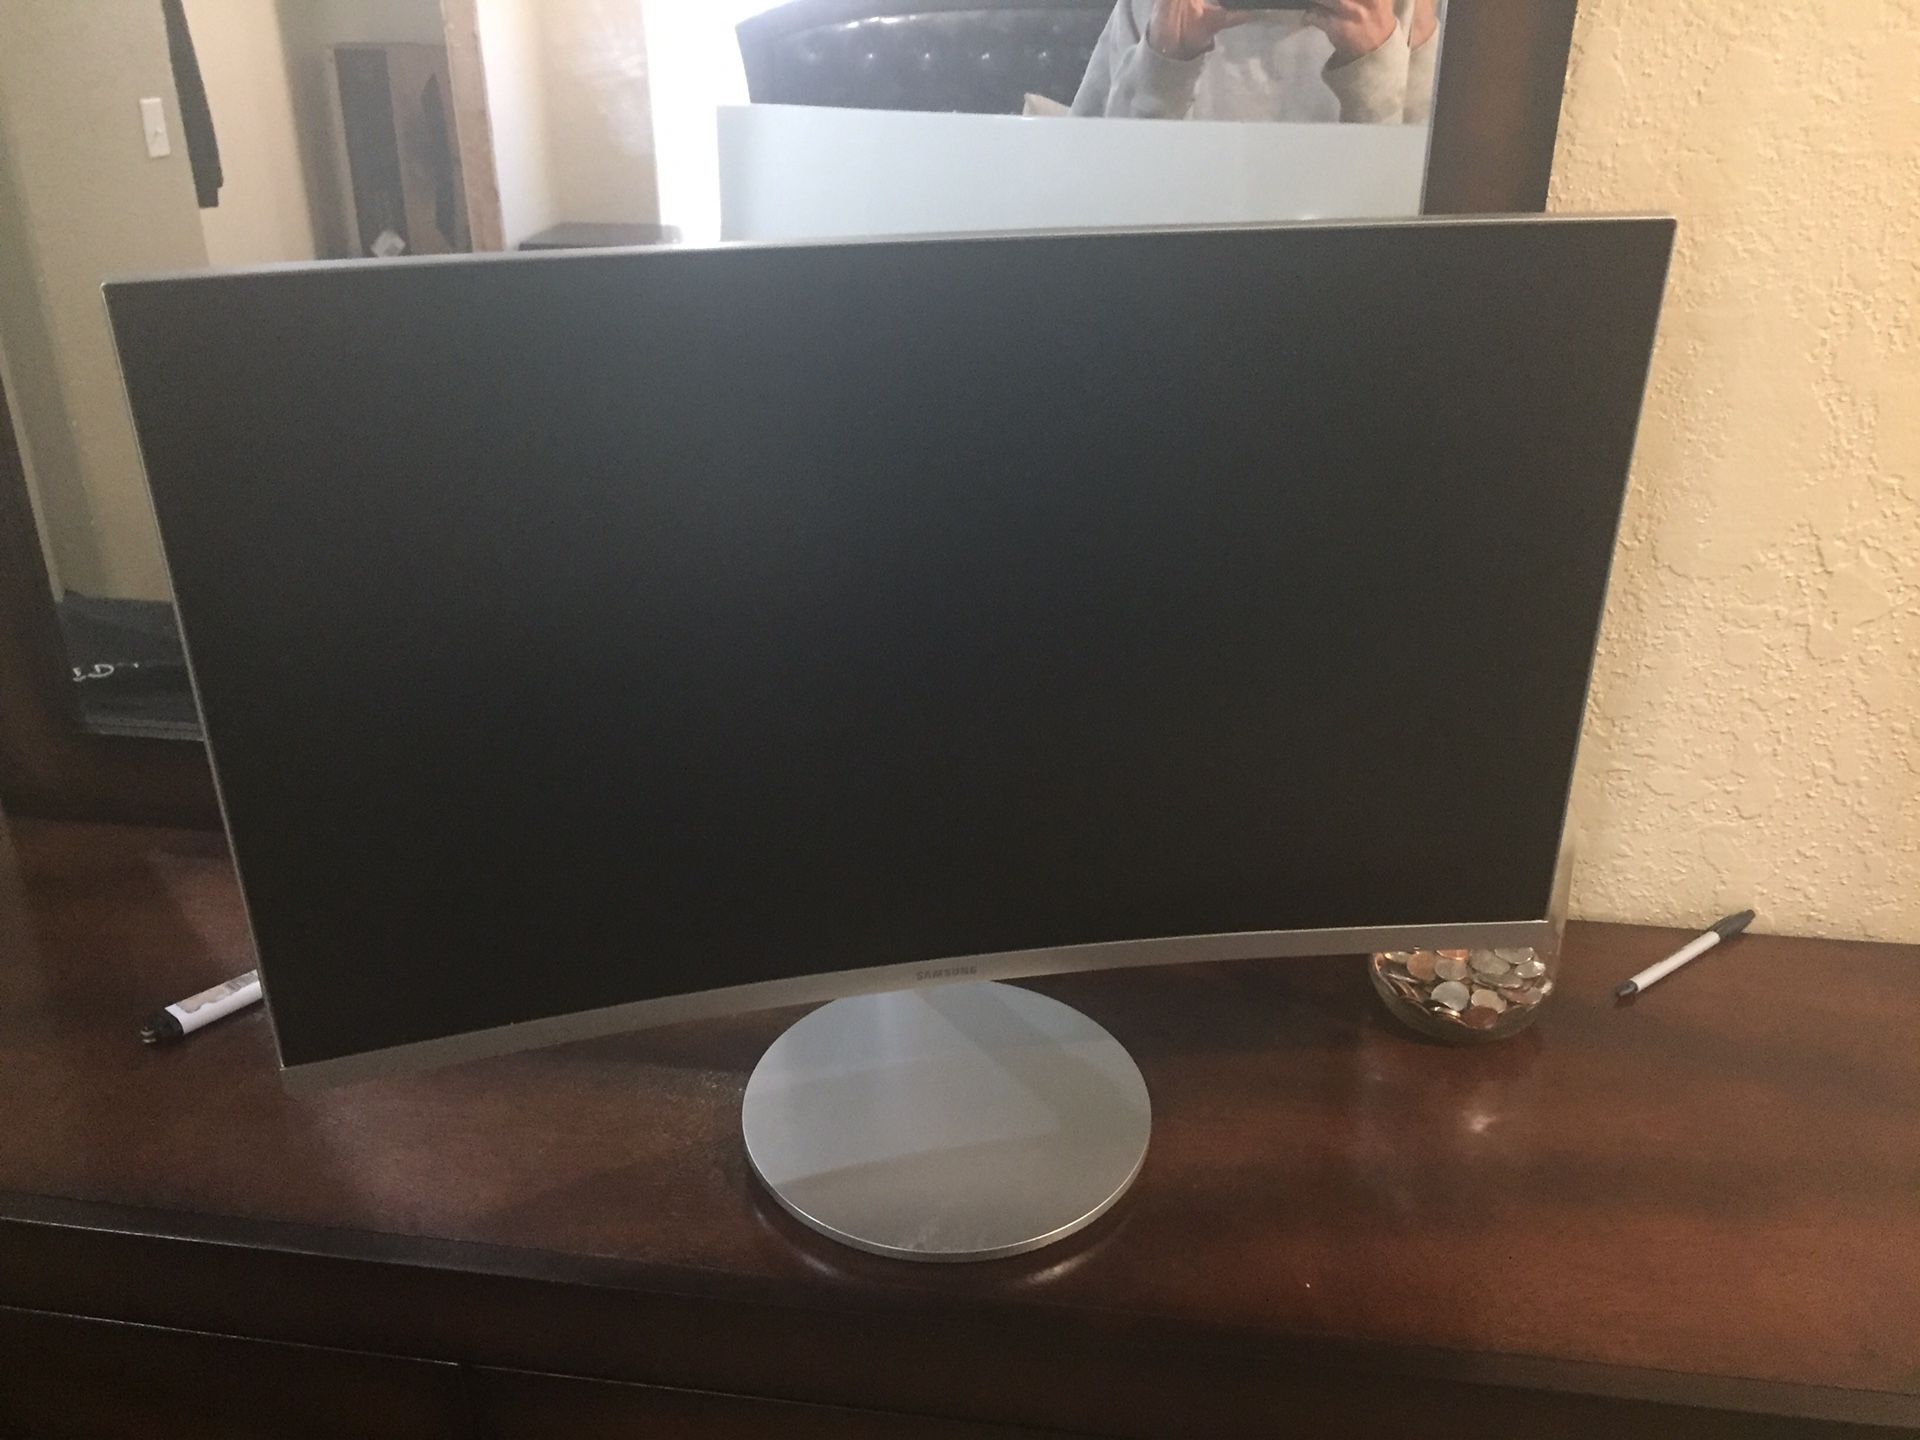 27” Curved Samsung Monitor